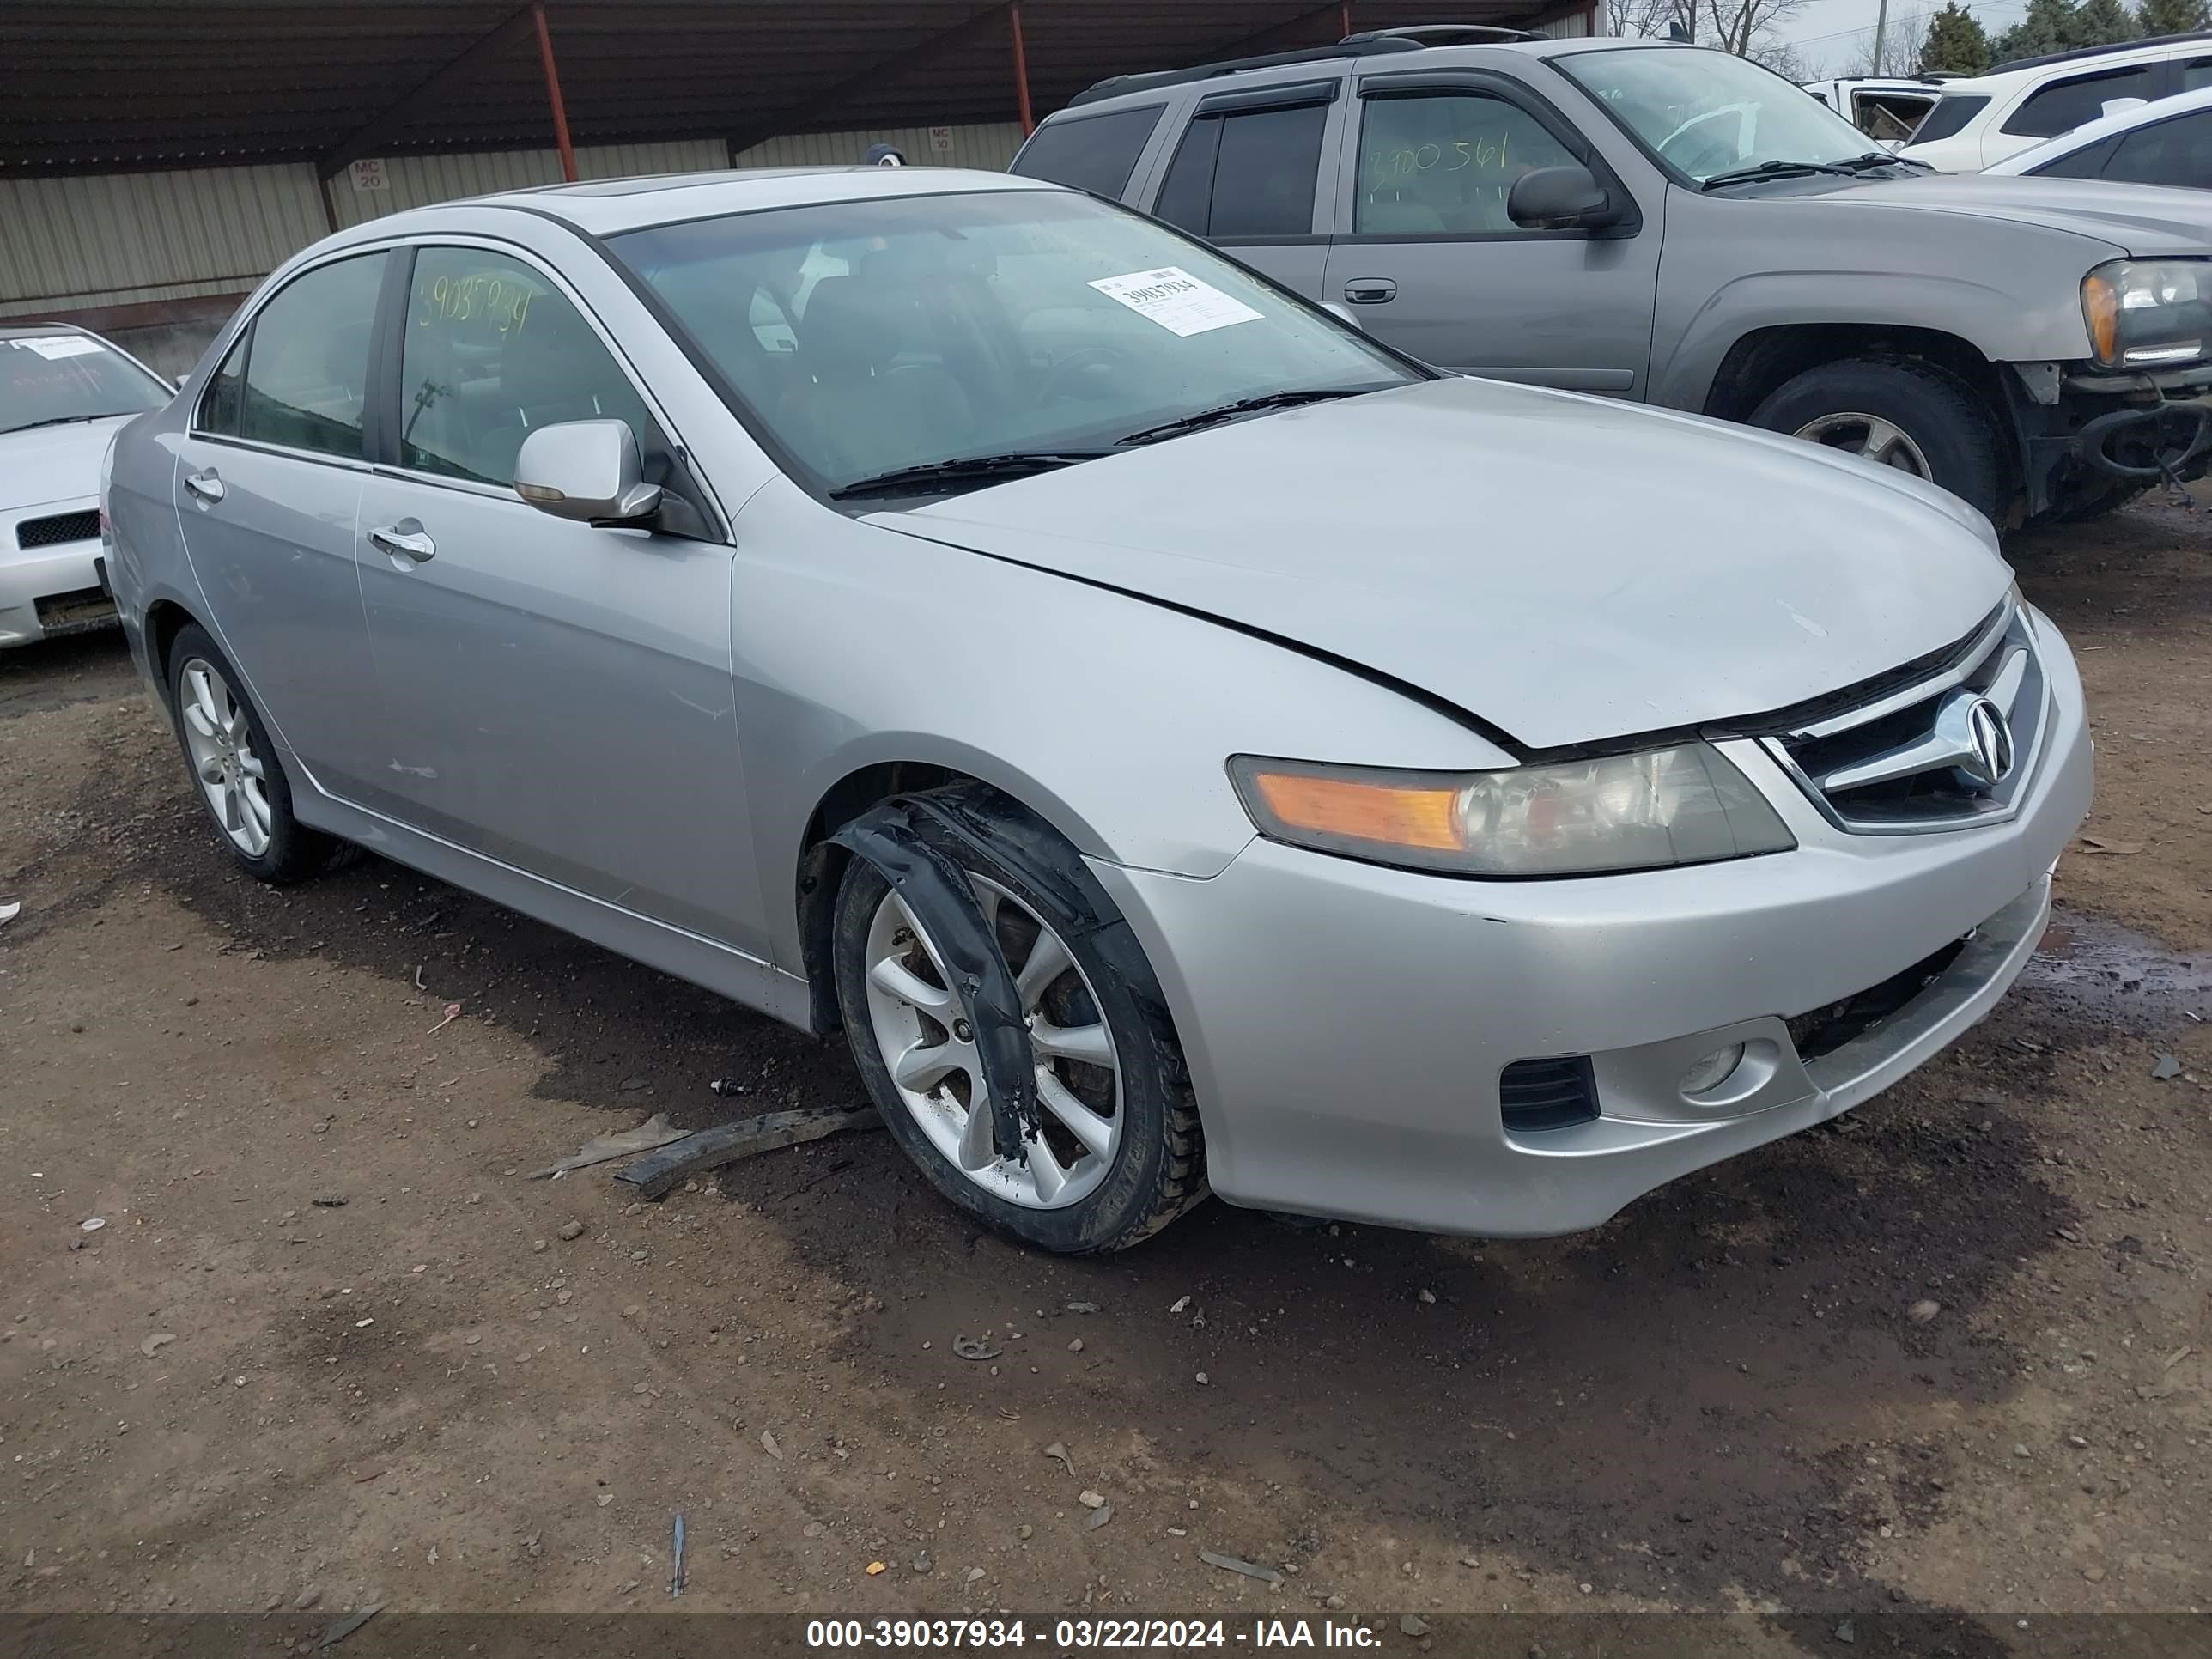 vin: JH4CL96818C017078 JH4CL96818C017078 2008 acura tsx 2400 for Sale in 43123, 1601 Thrallkill Road, Grove City, Ohio, USA